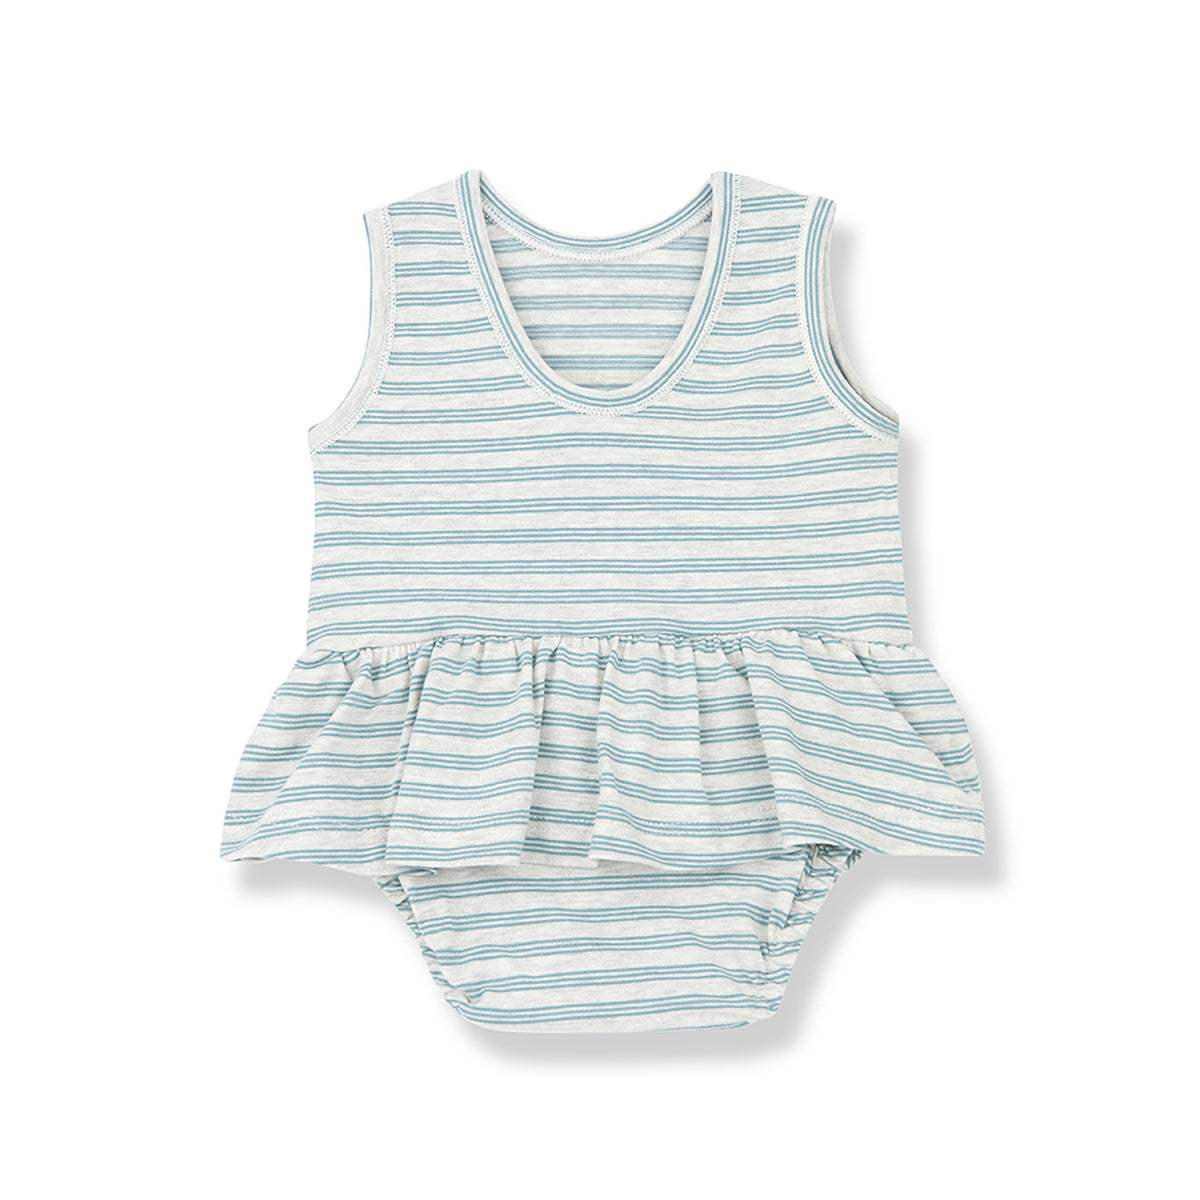 Mint green and white stripe baby dress front view